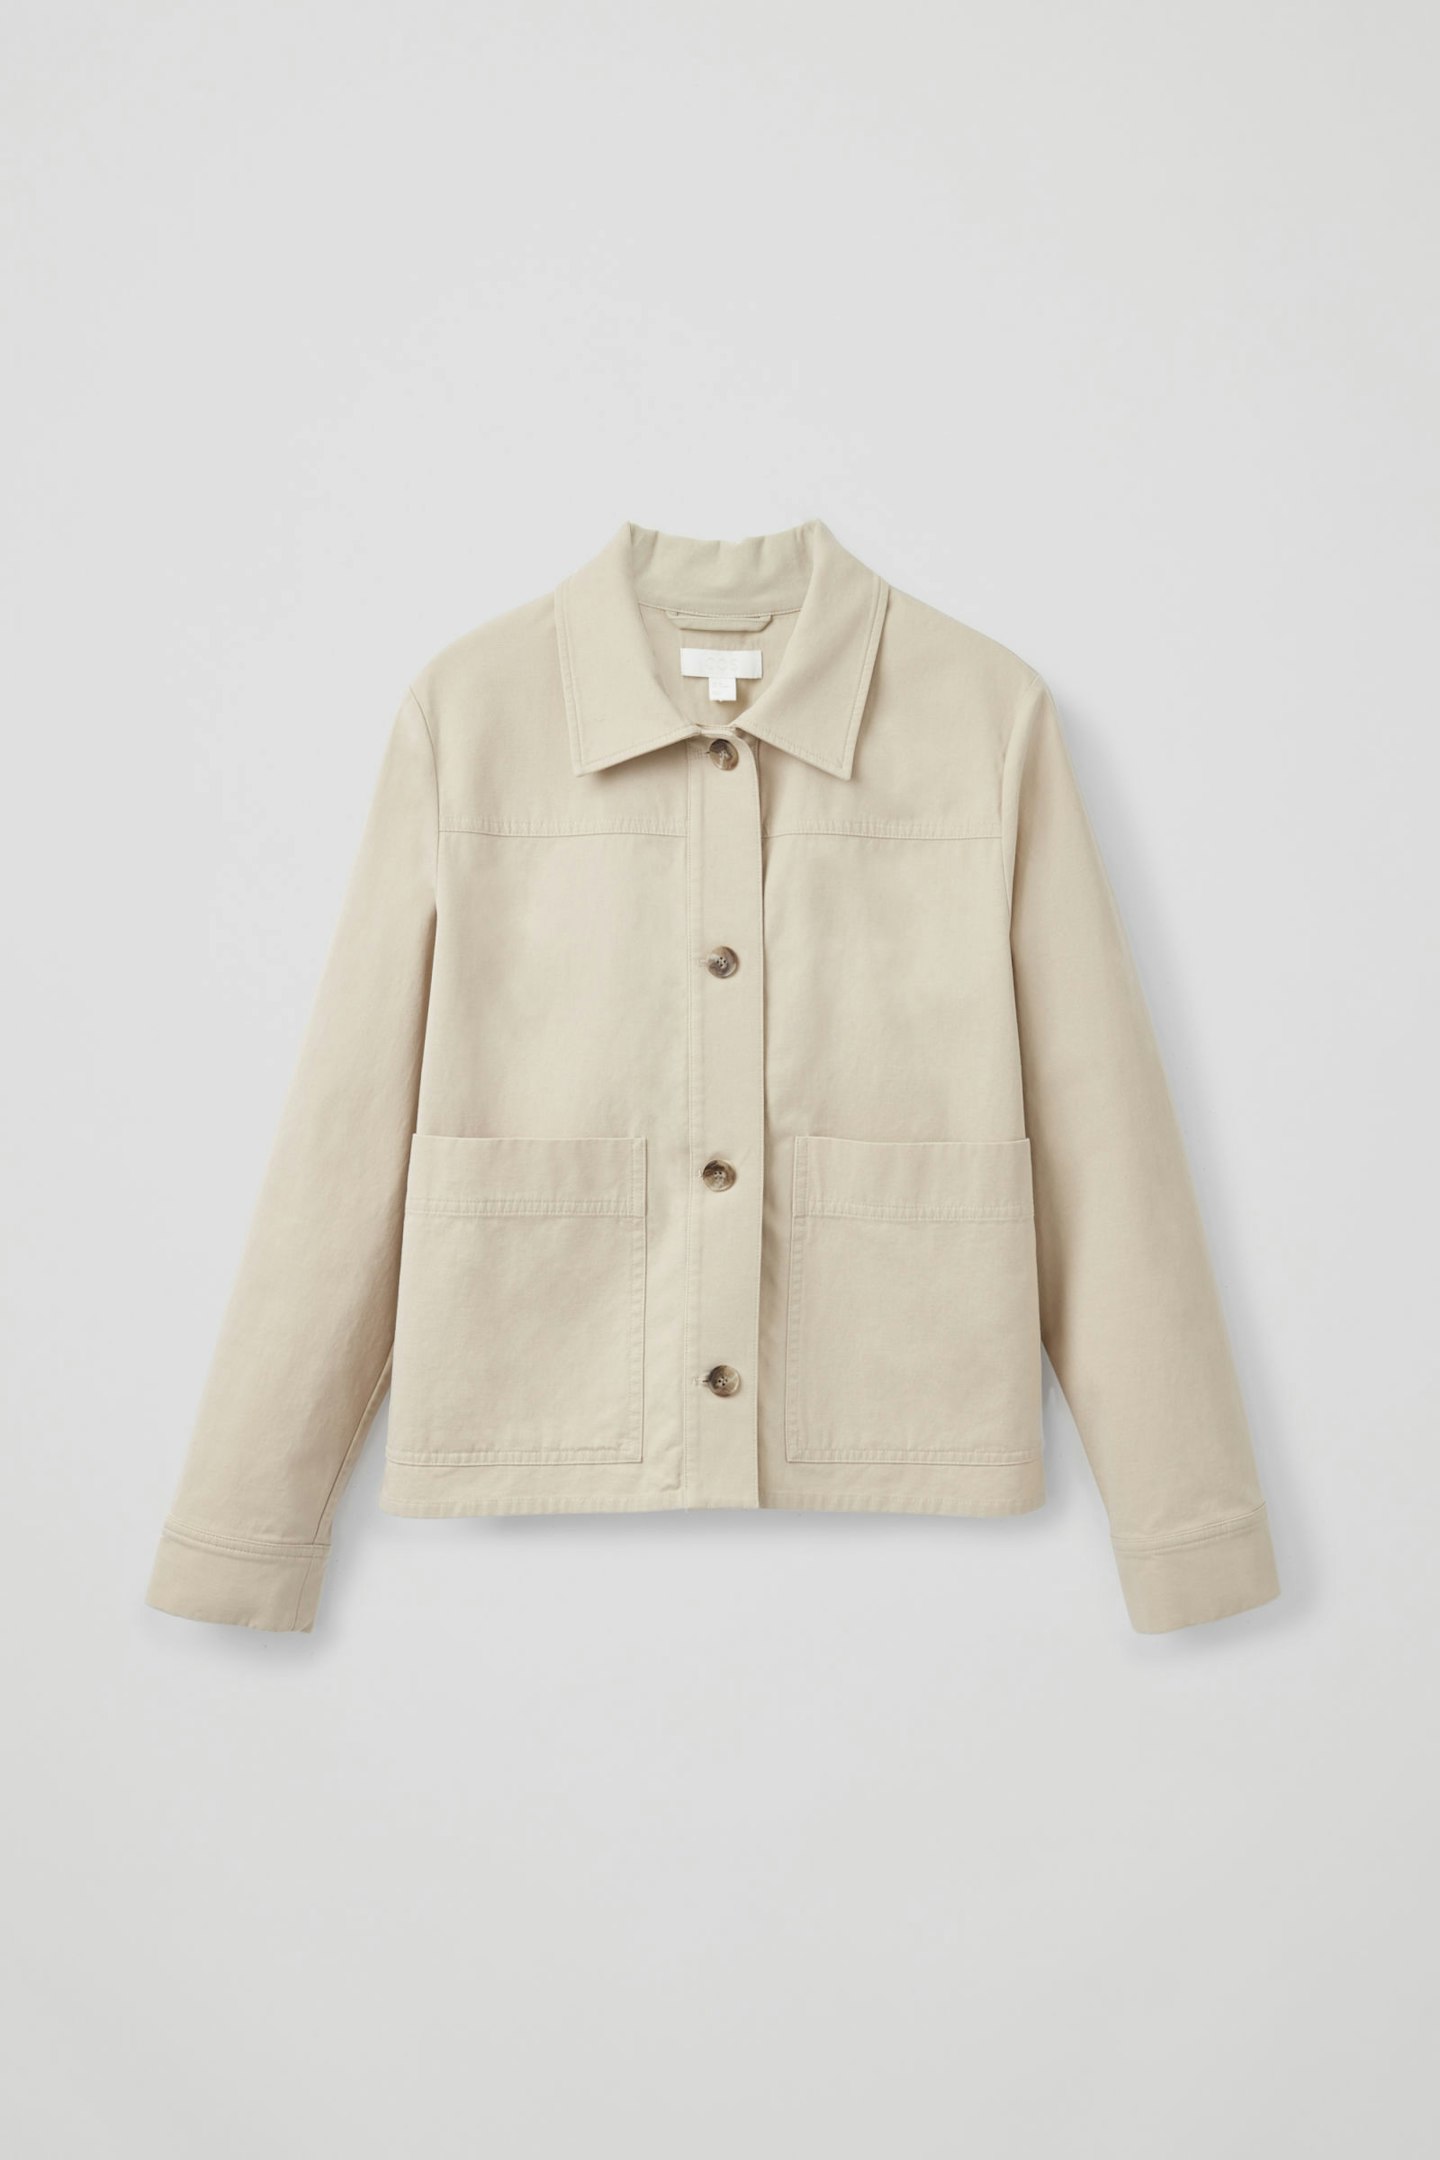 Cos, Button-Up Jacket, £79